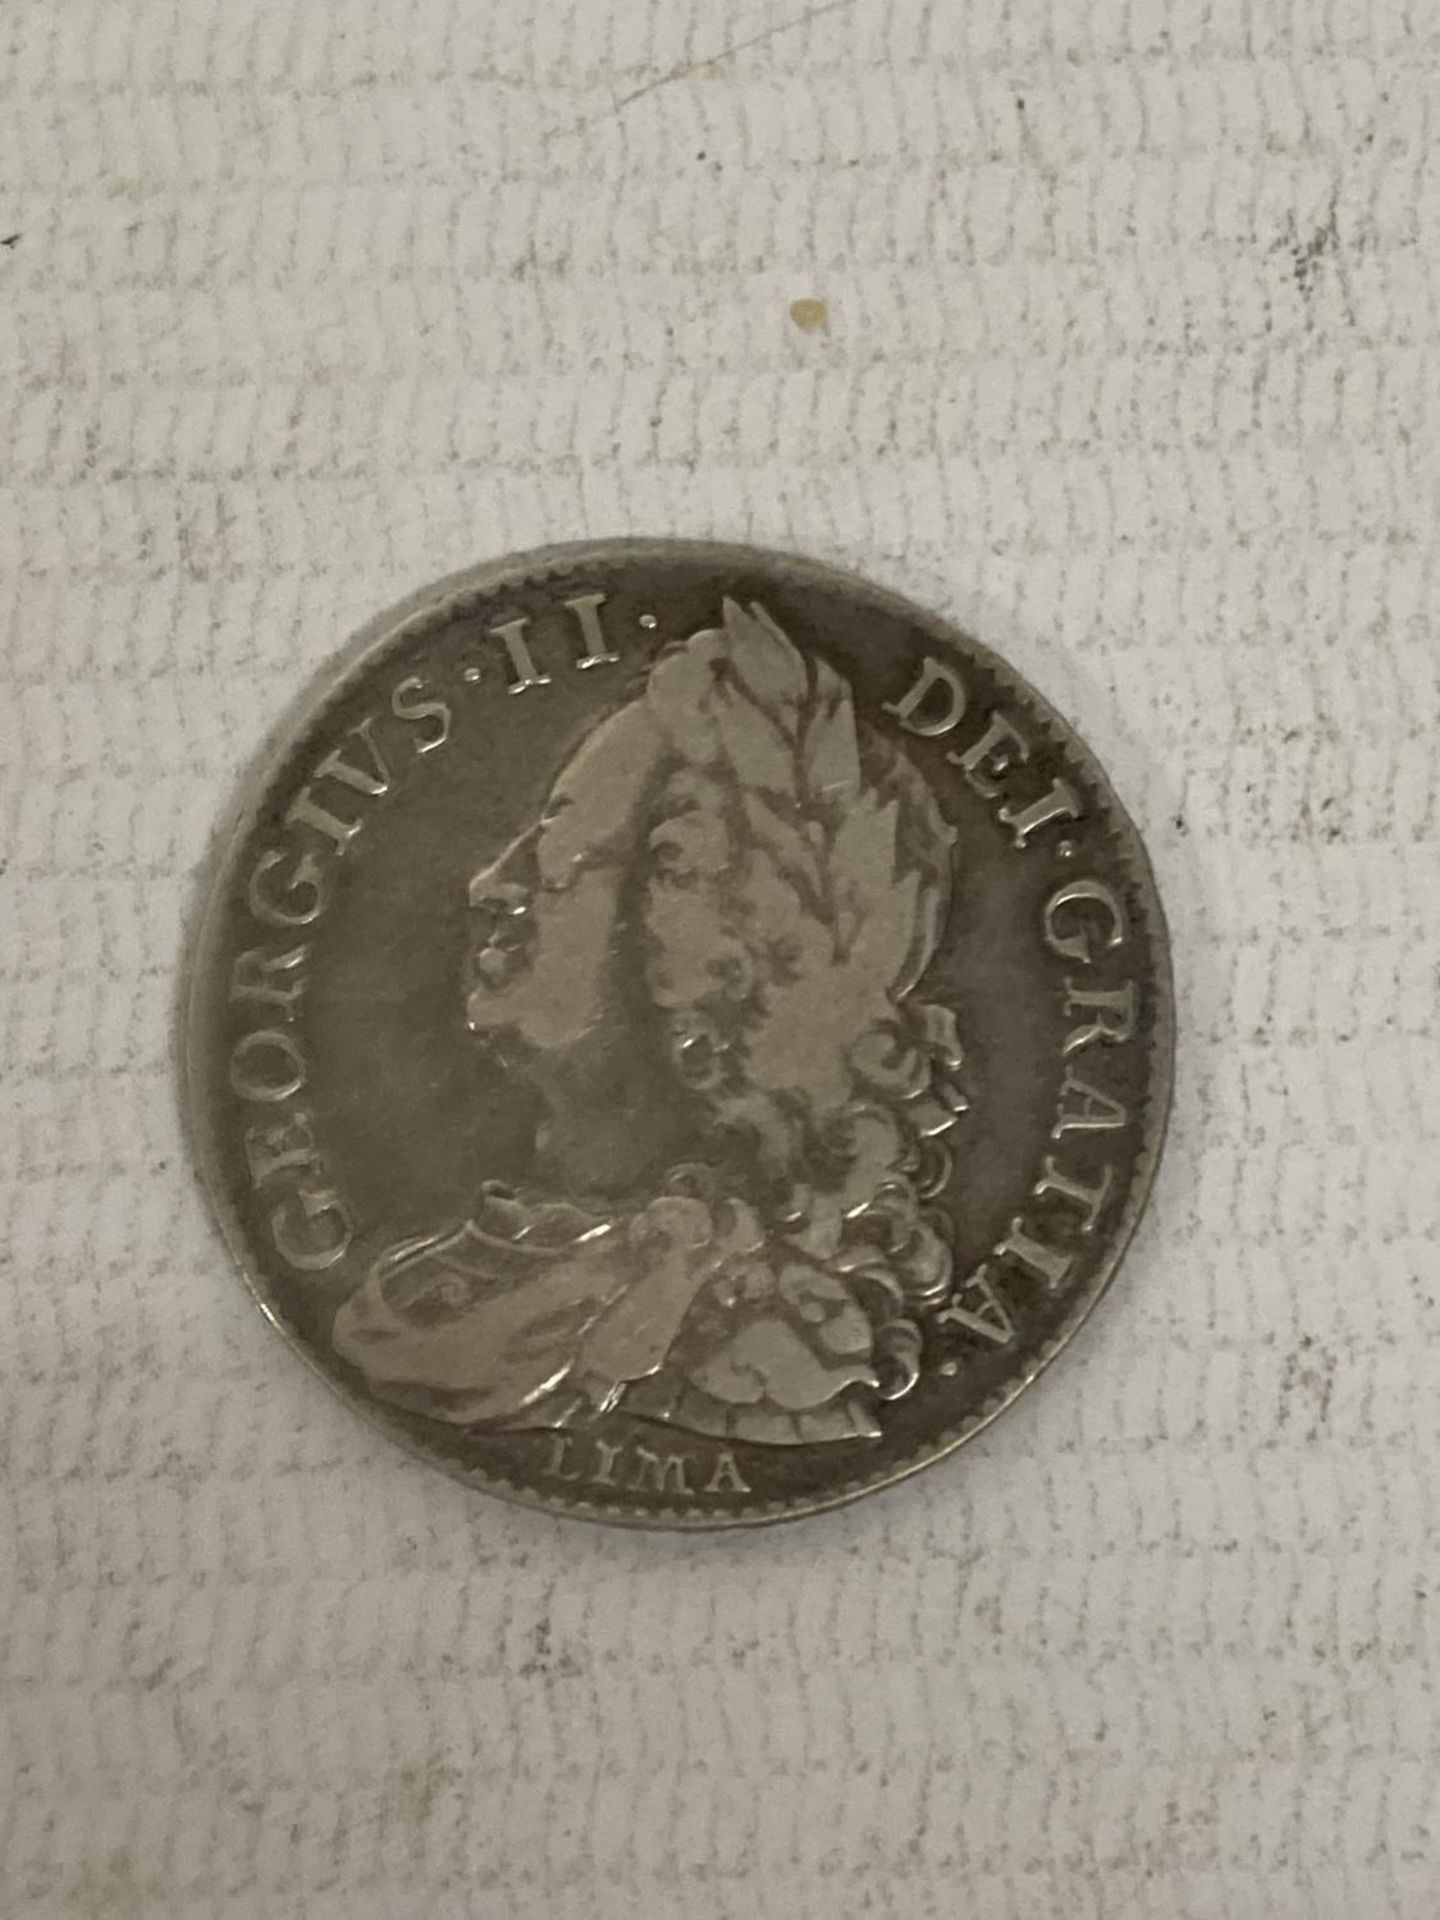 UK , 1746 , KING GEORGE 11 , LIMA , SILVER HALF CROWN . FINE CONDITION